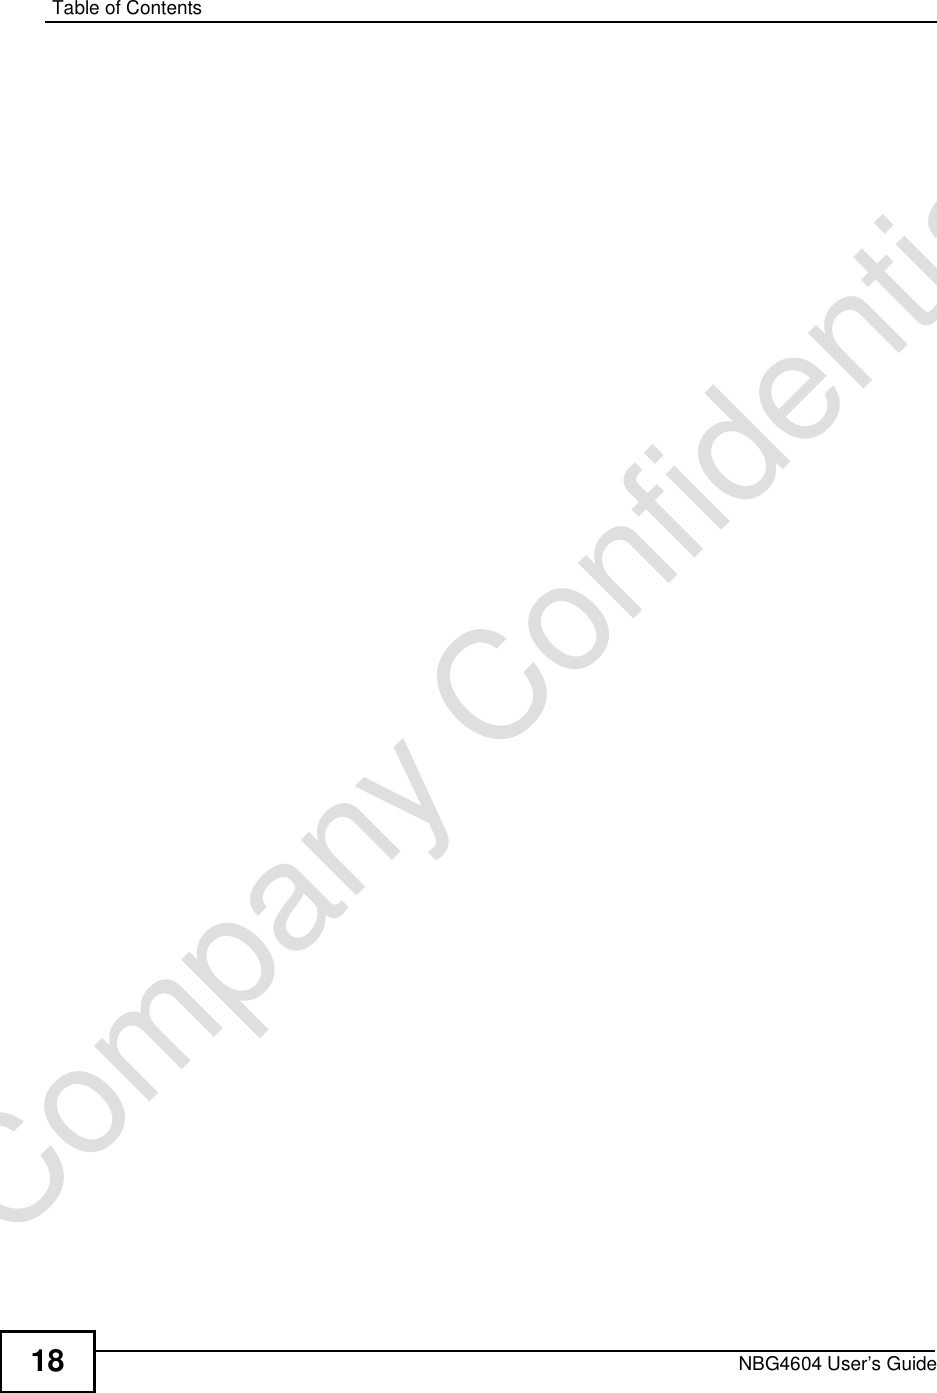 Table of ContentsNBG4604 User’s Guide18Company Confidential